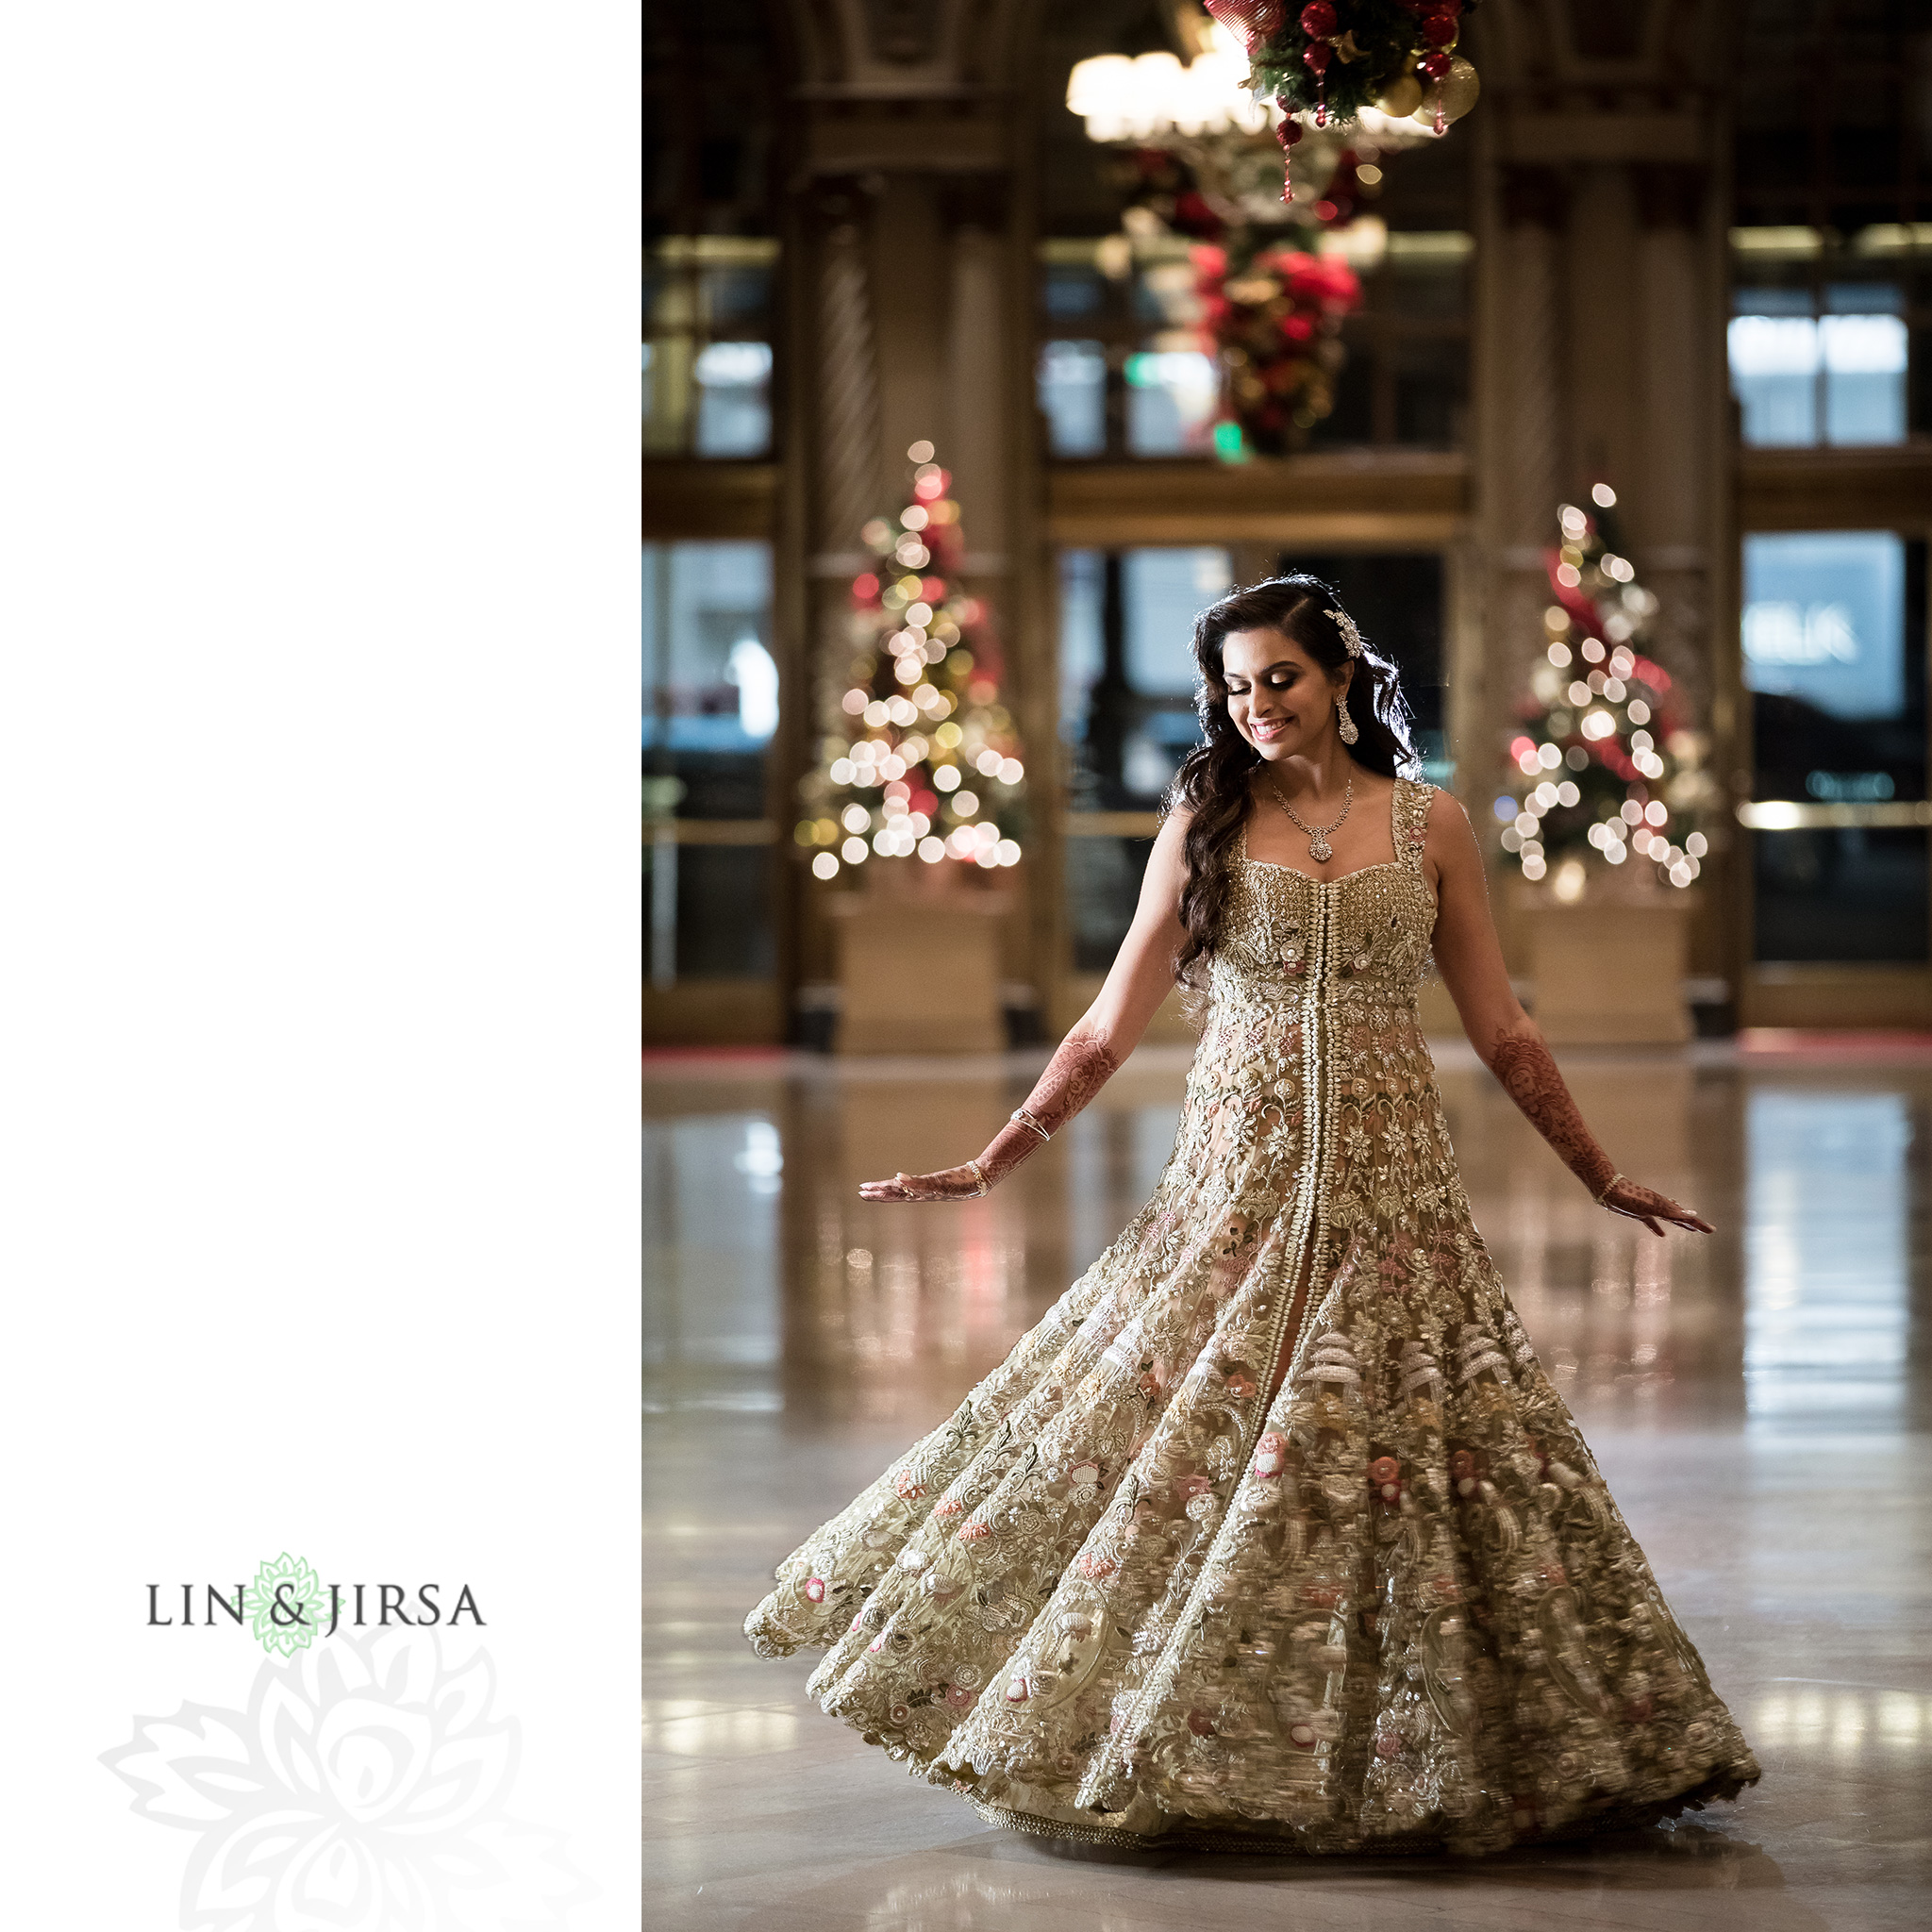 07-the-biltmore-los-angeles-wedding-photography